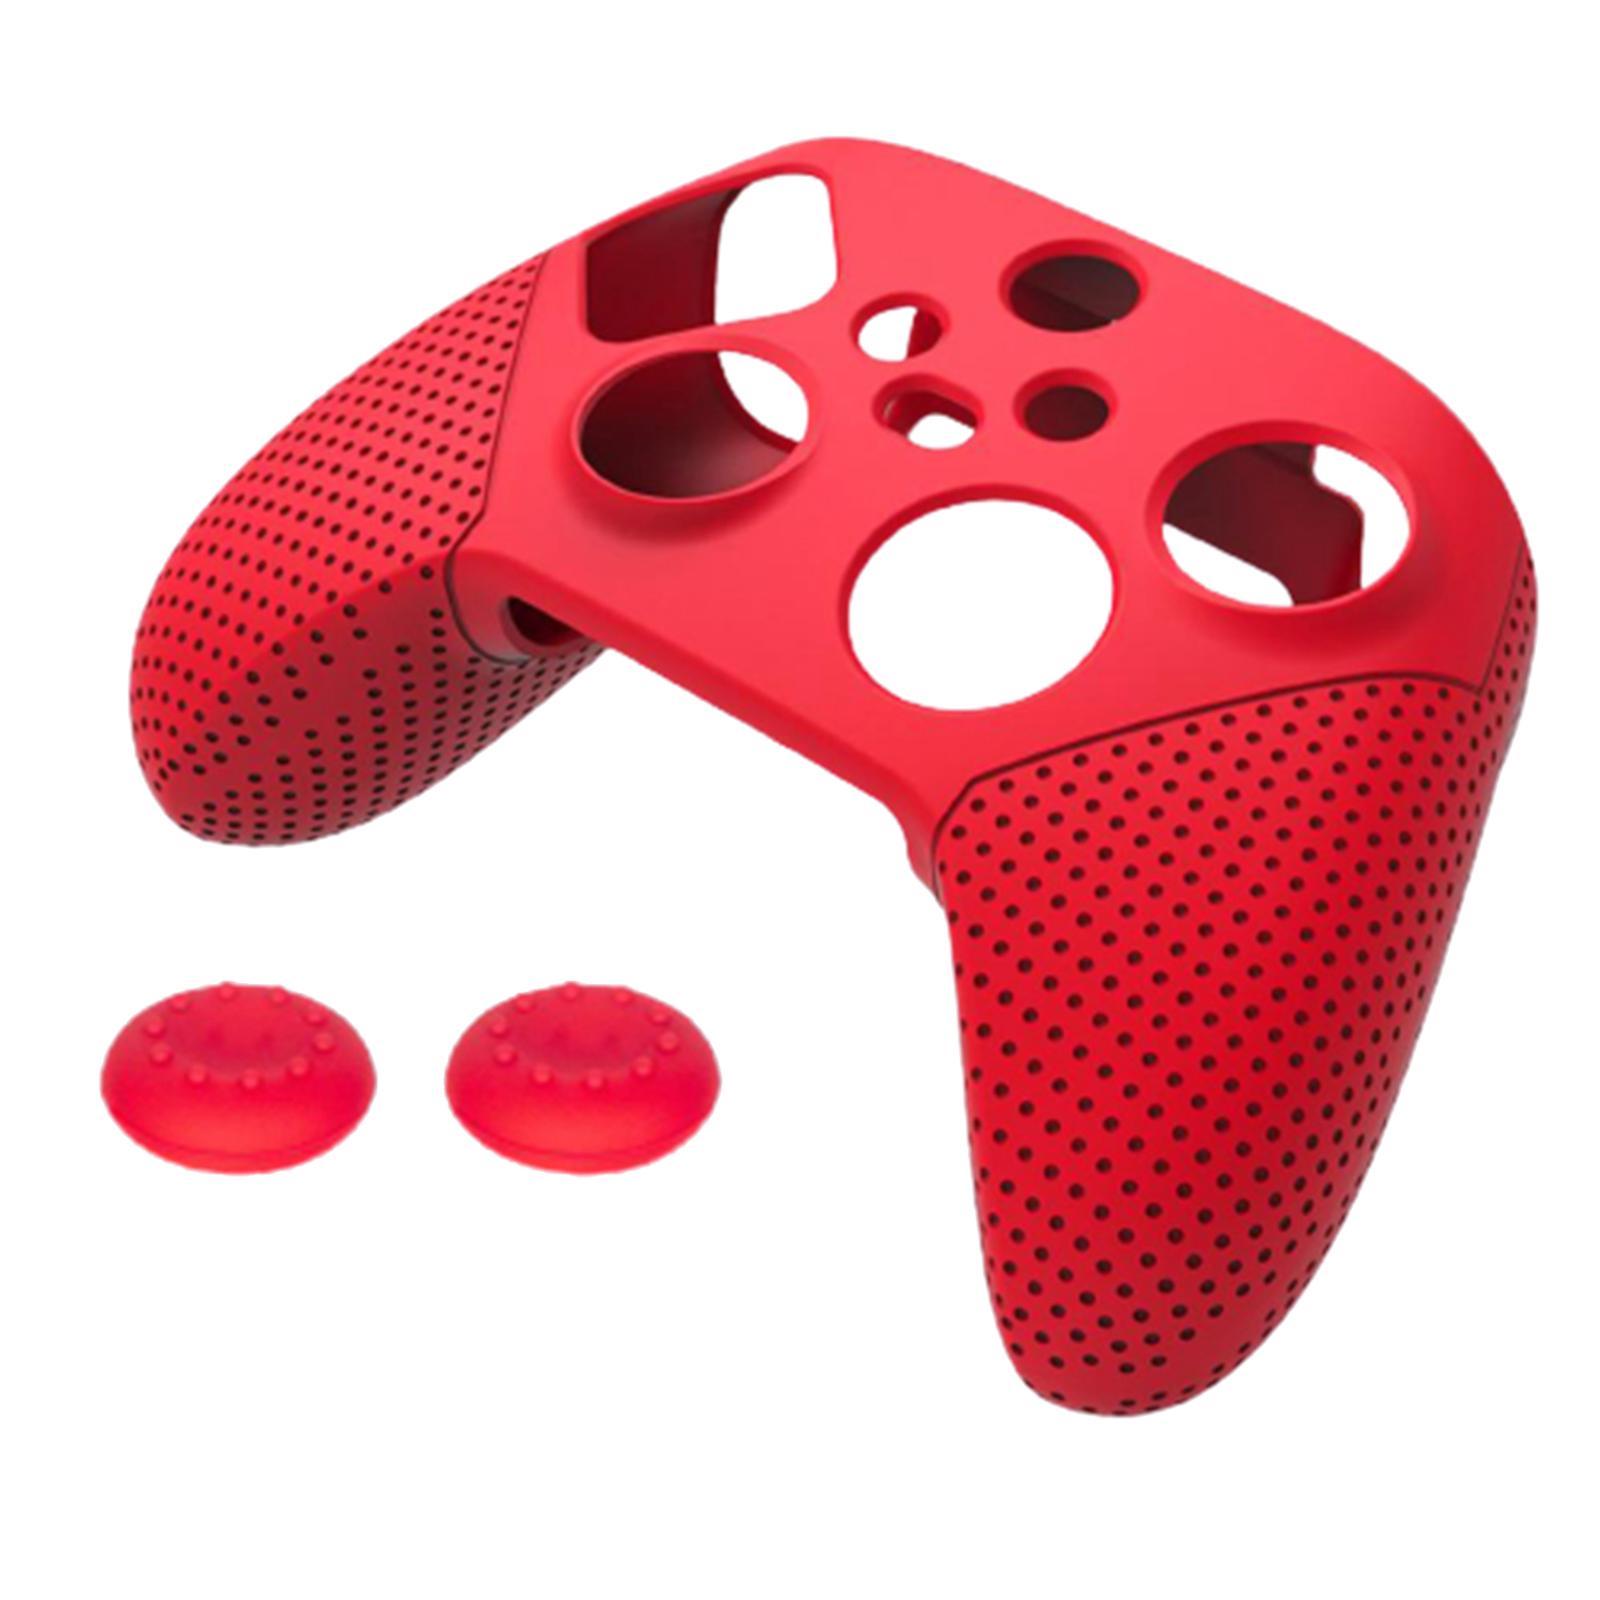 2x Silicone Case Cover Skin Joystick Grip for Xbox Series S X Controller